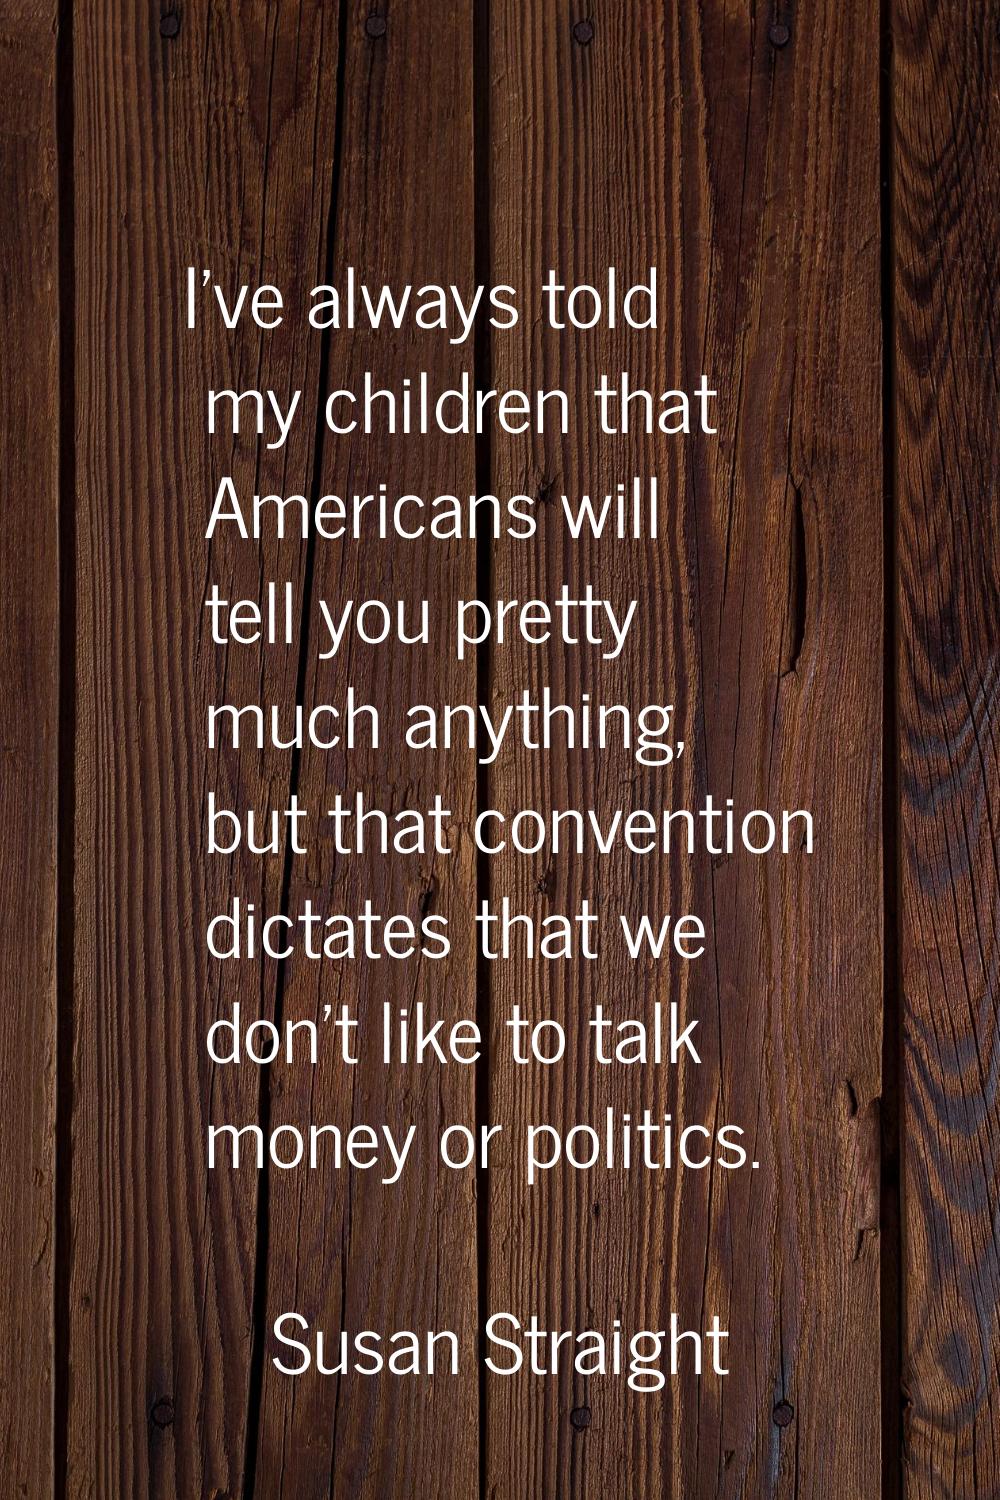 I've always told my children that Americans will tell you pretty much anything, but that convention